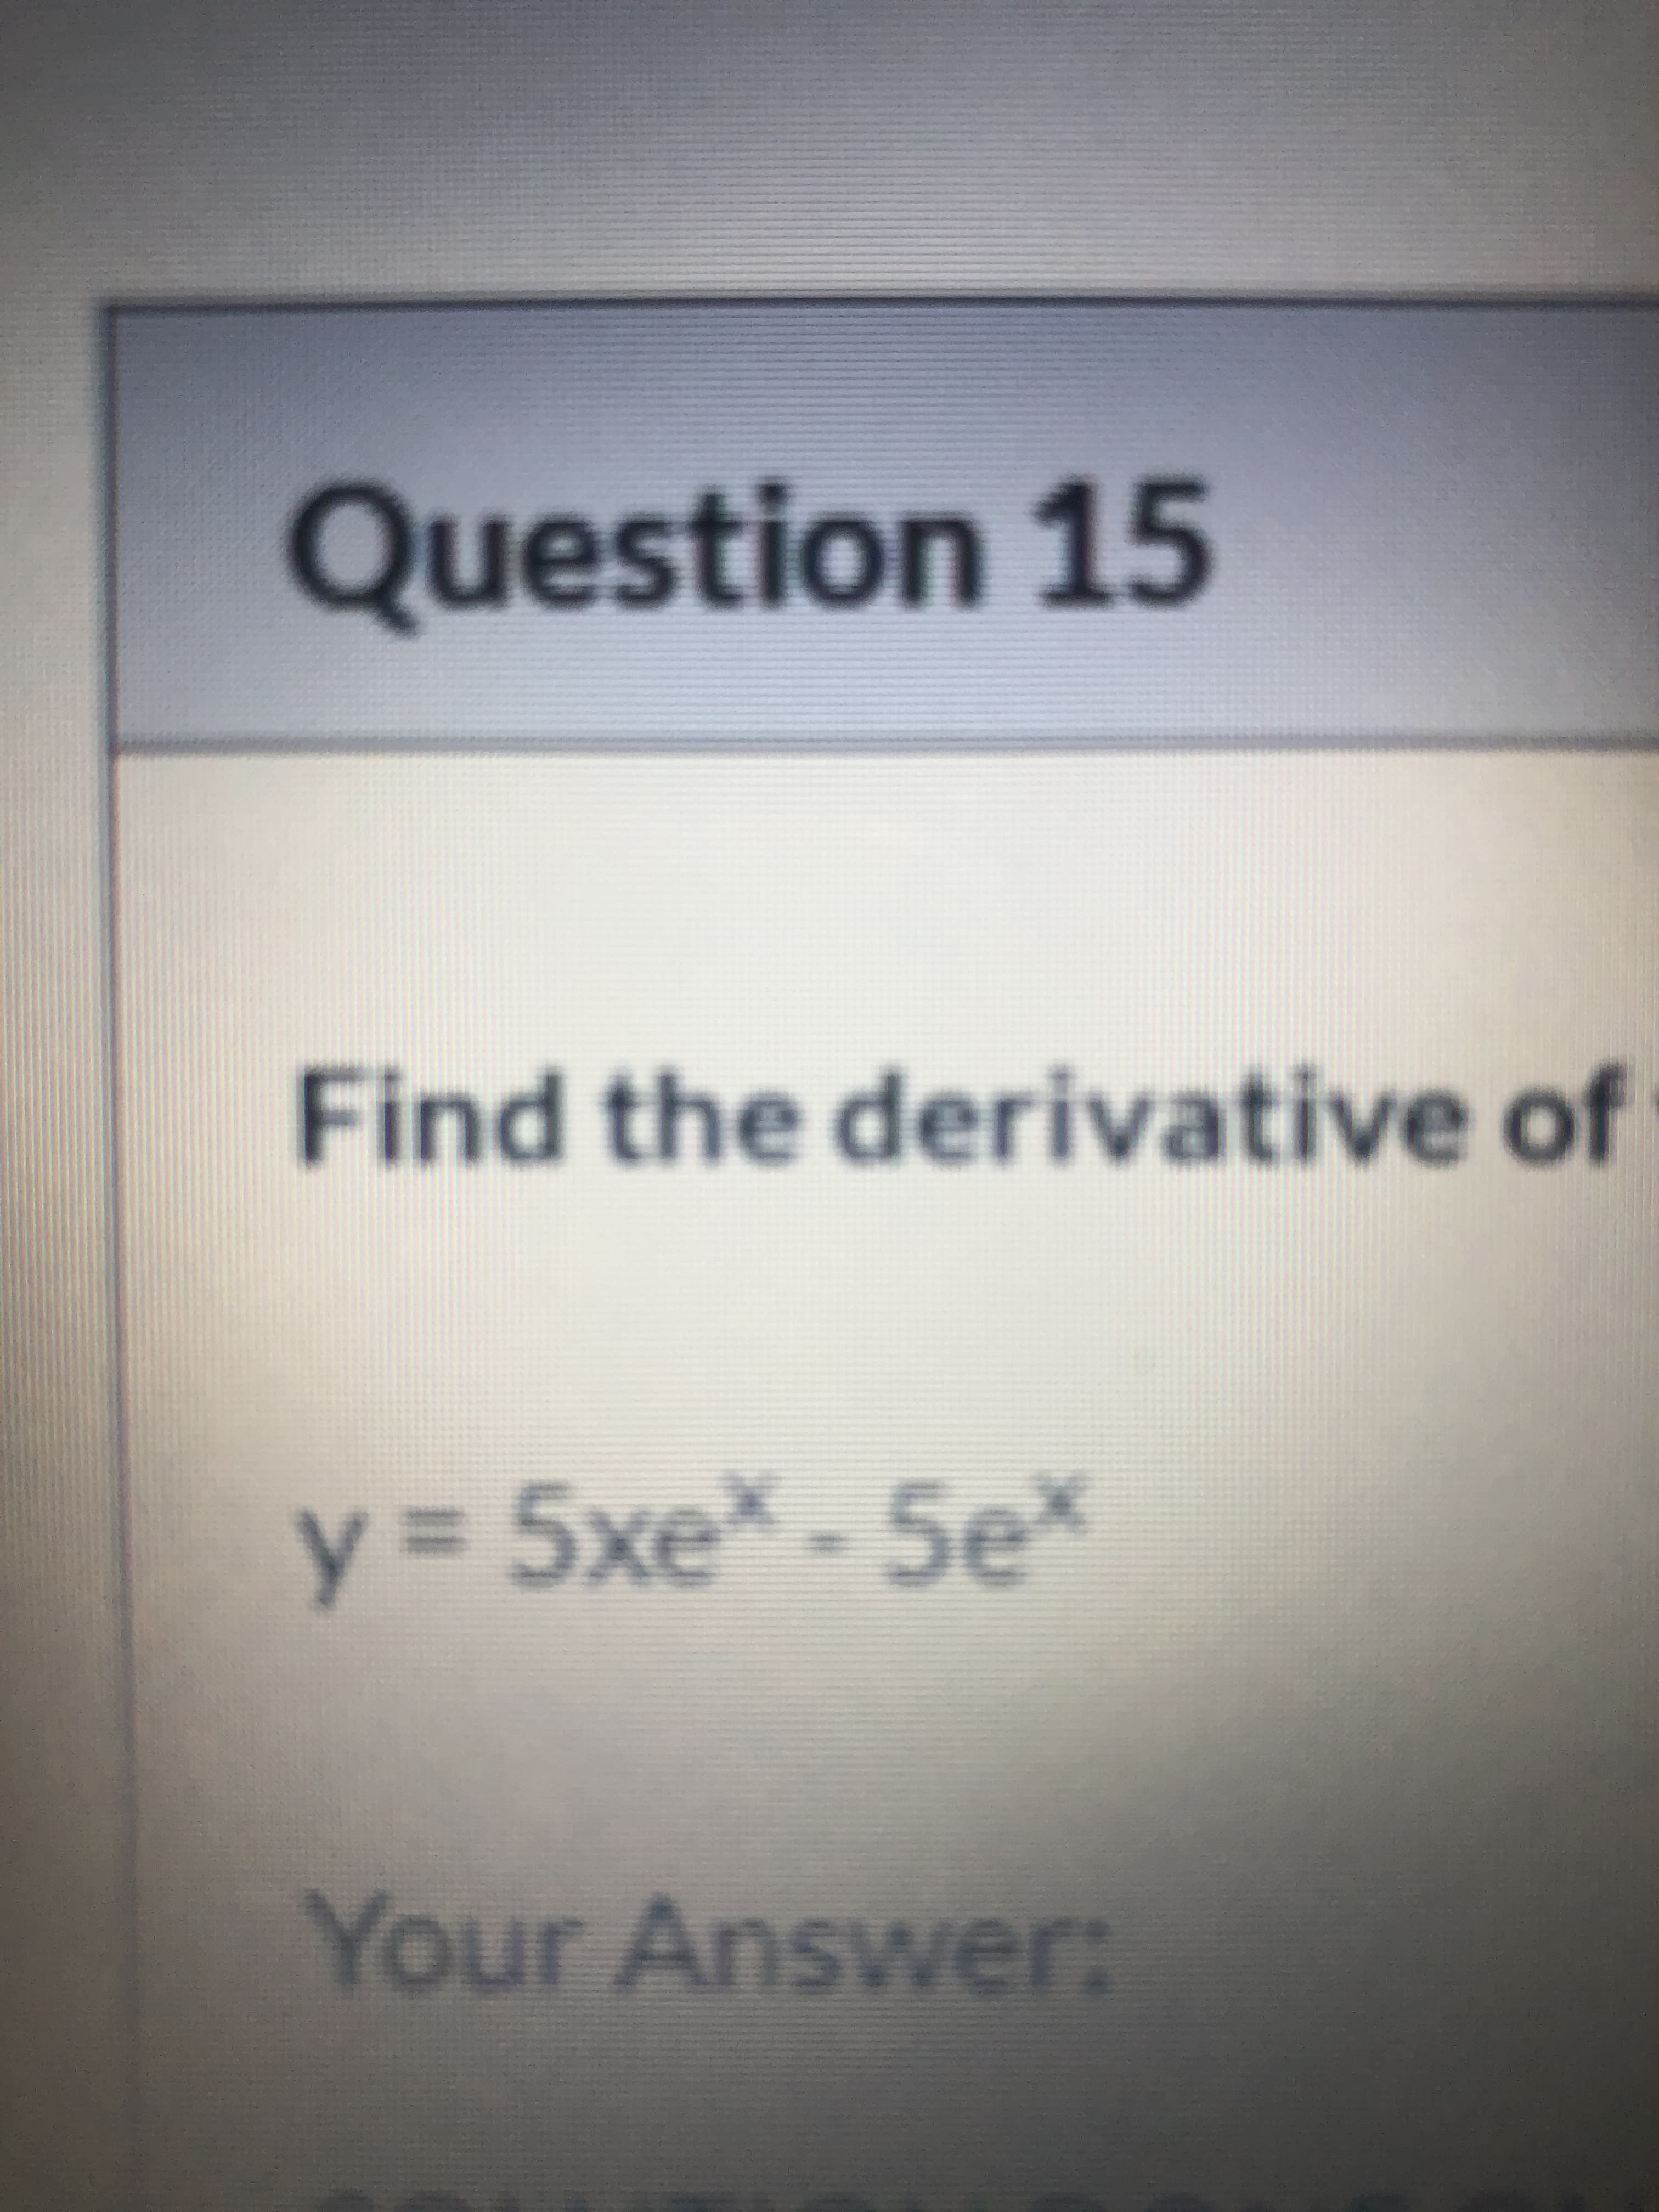 Find the derivative of
y = 5xe - 5e*
